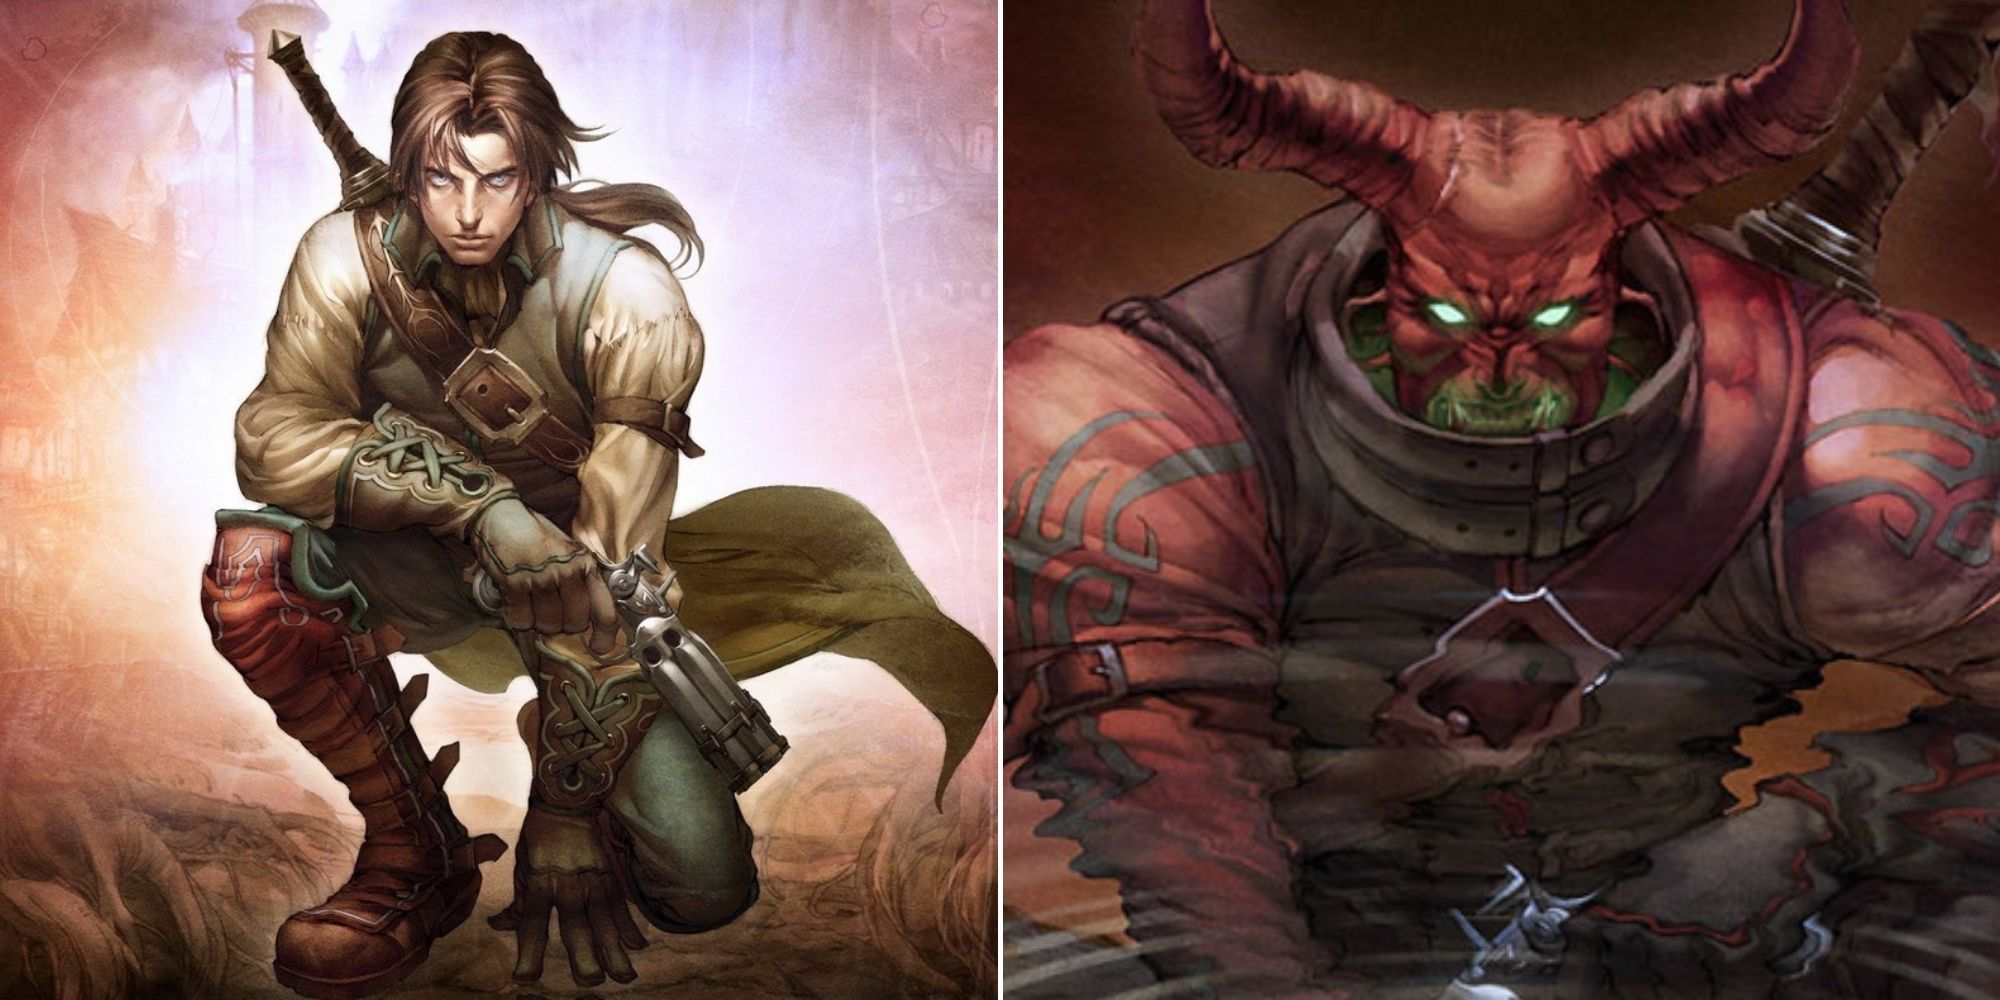 Fable II - Good protagonist and Evil protagonist from the cover art